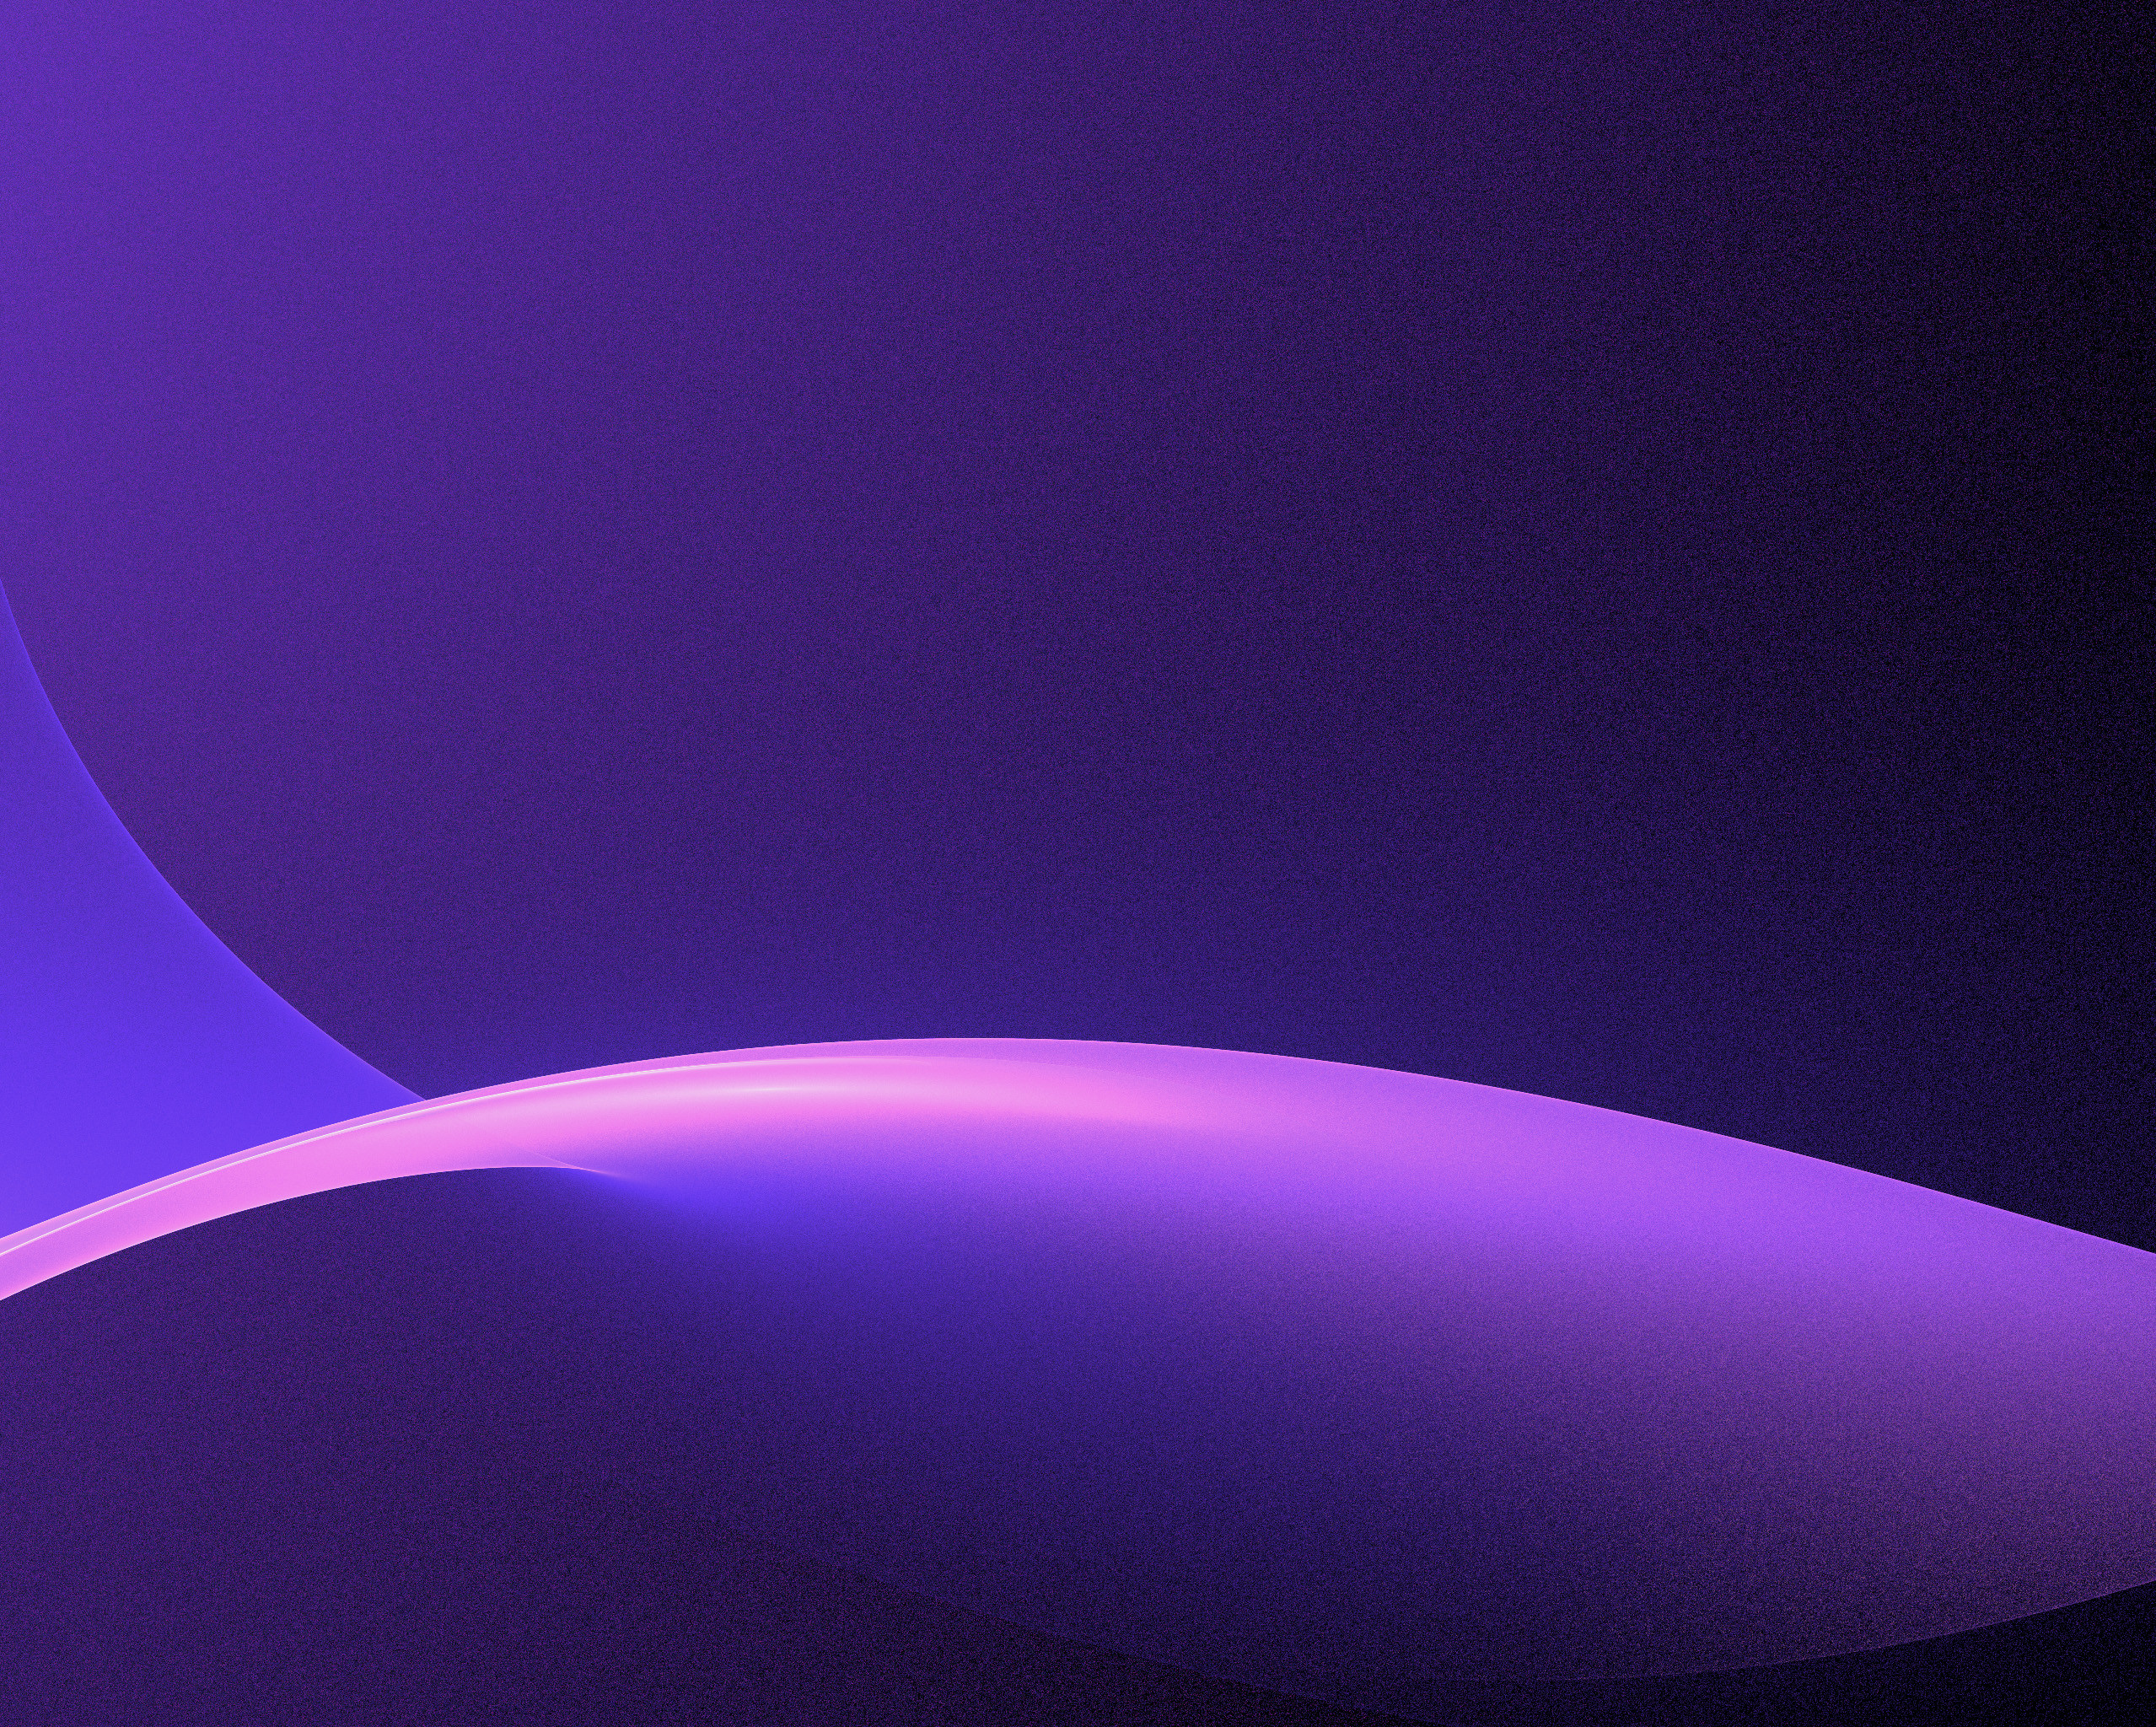 2557x2048 simple soft purple and blue curving fractal background with space for text